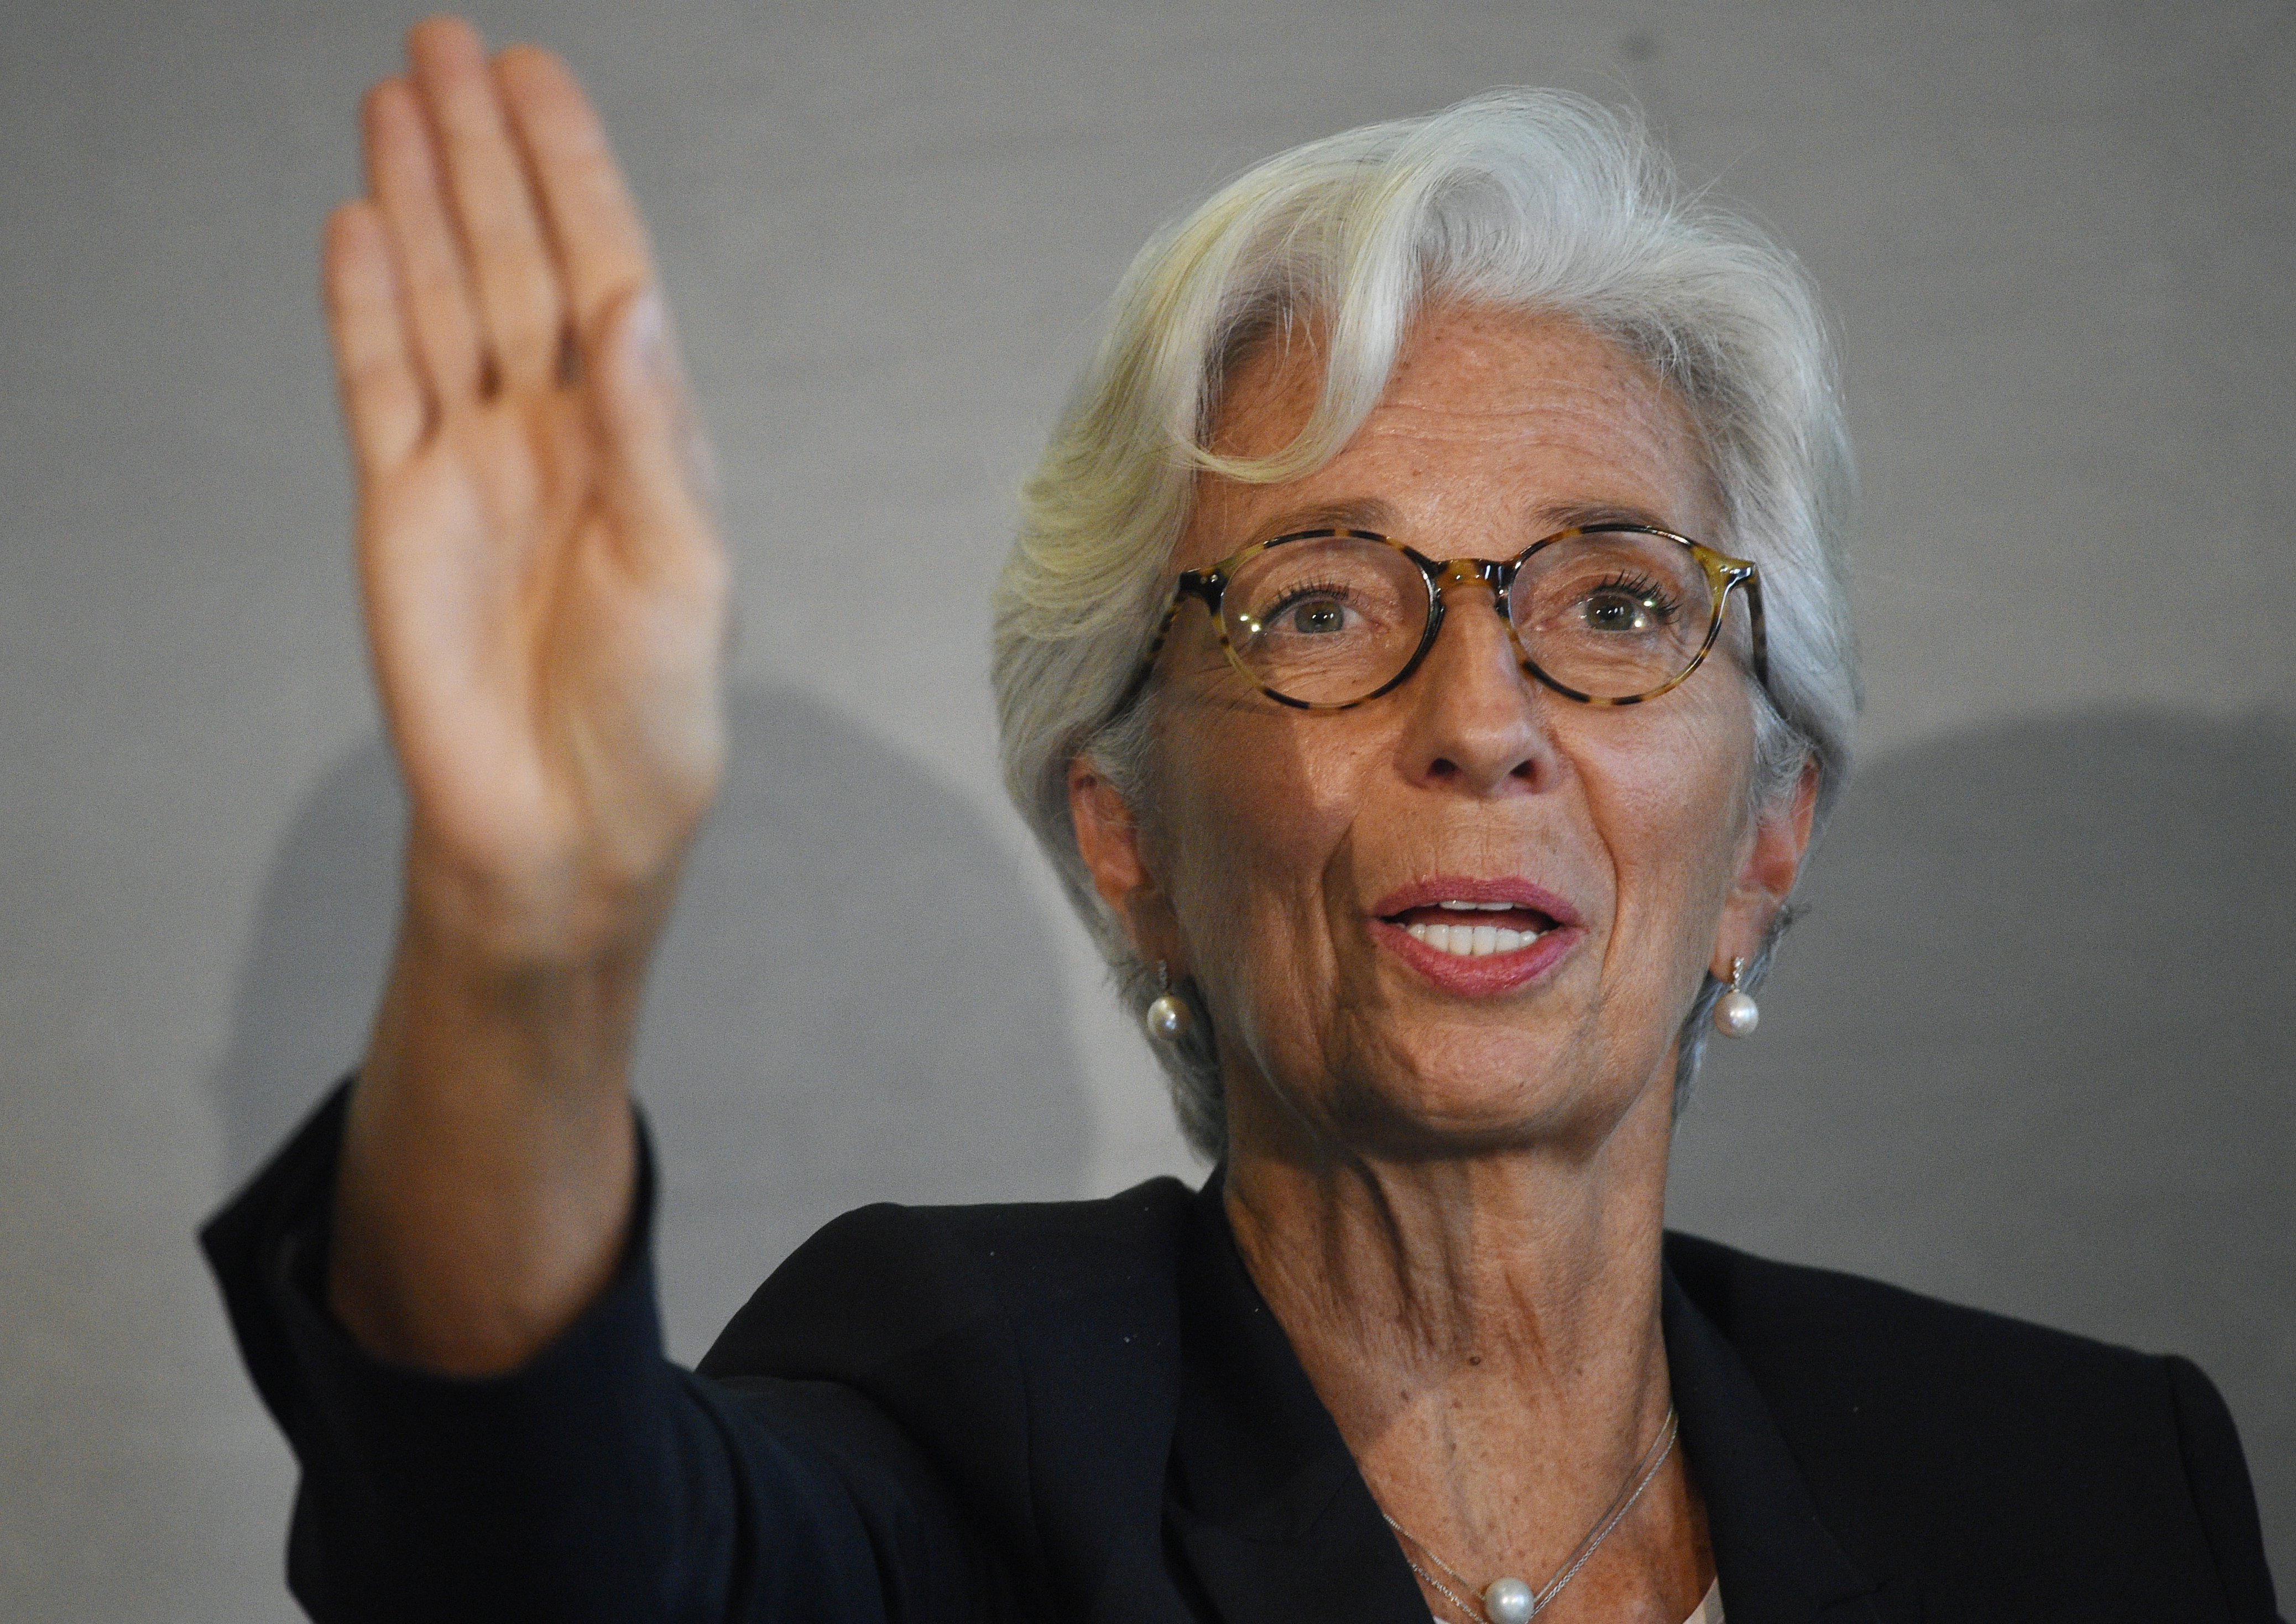 Economic impact of the Catalan conflict was minor, says IMF and AIReF